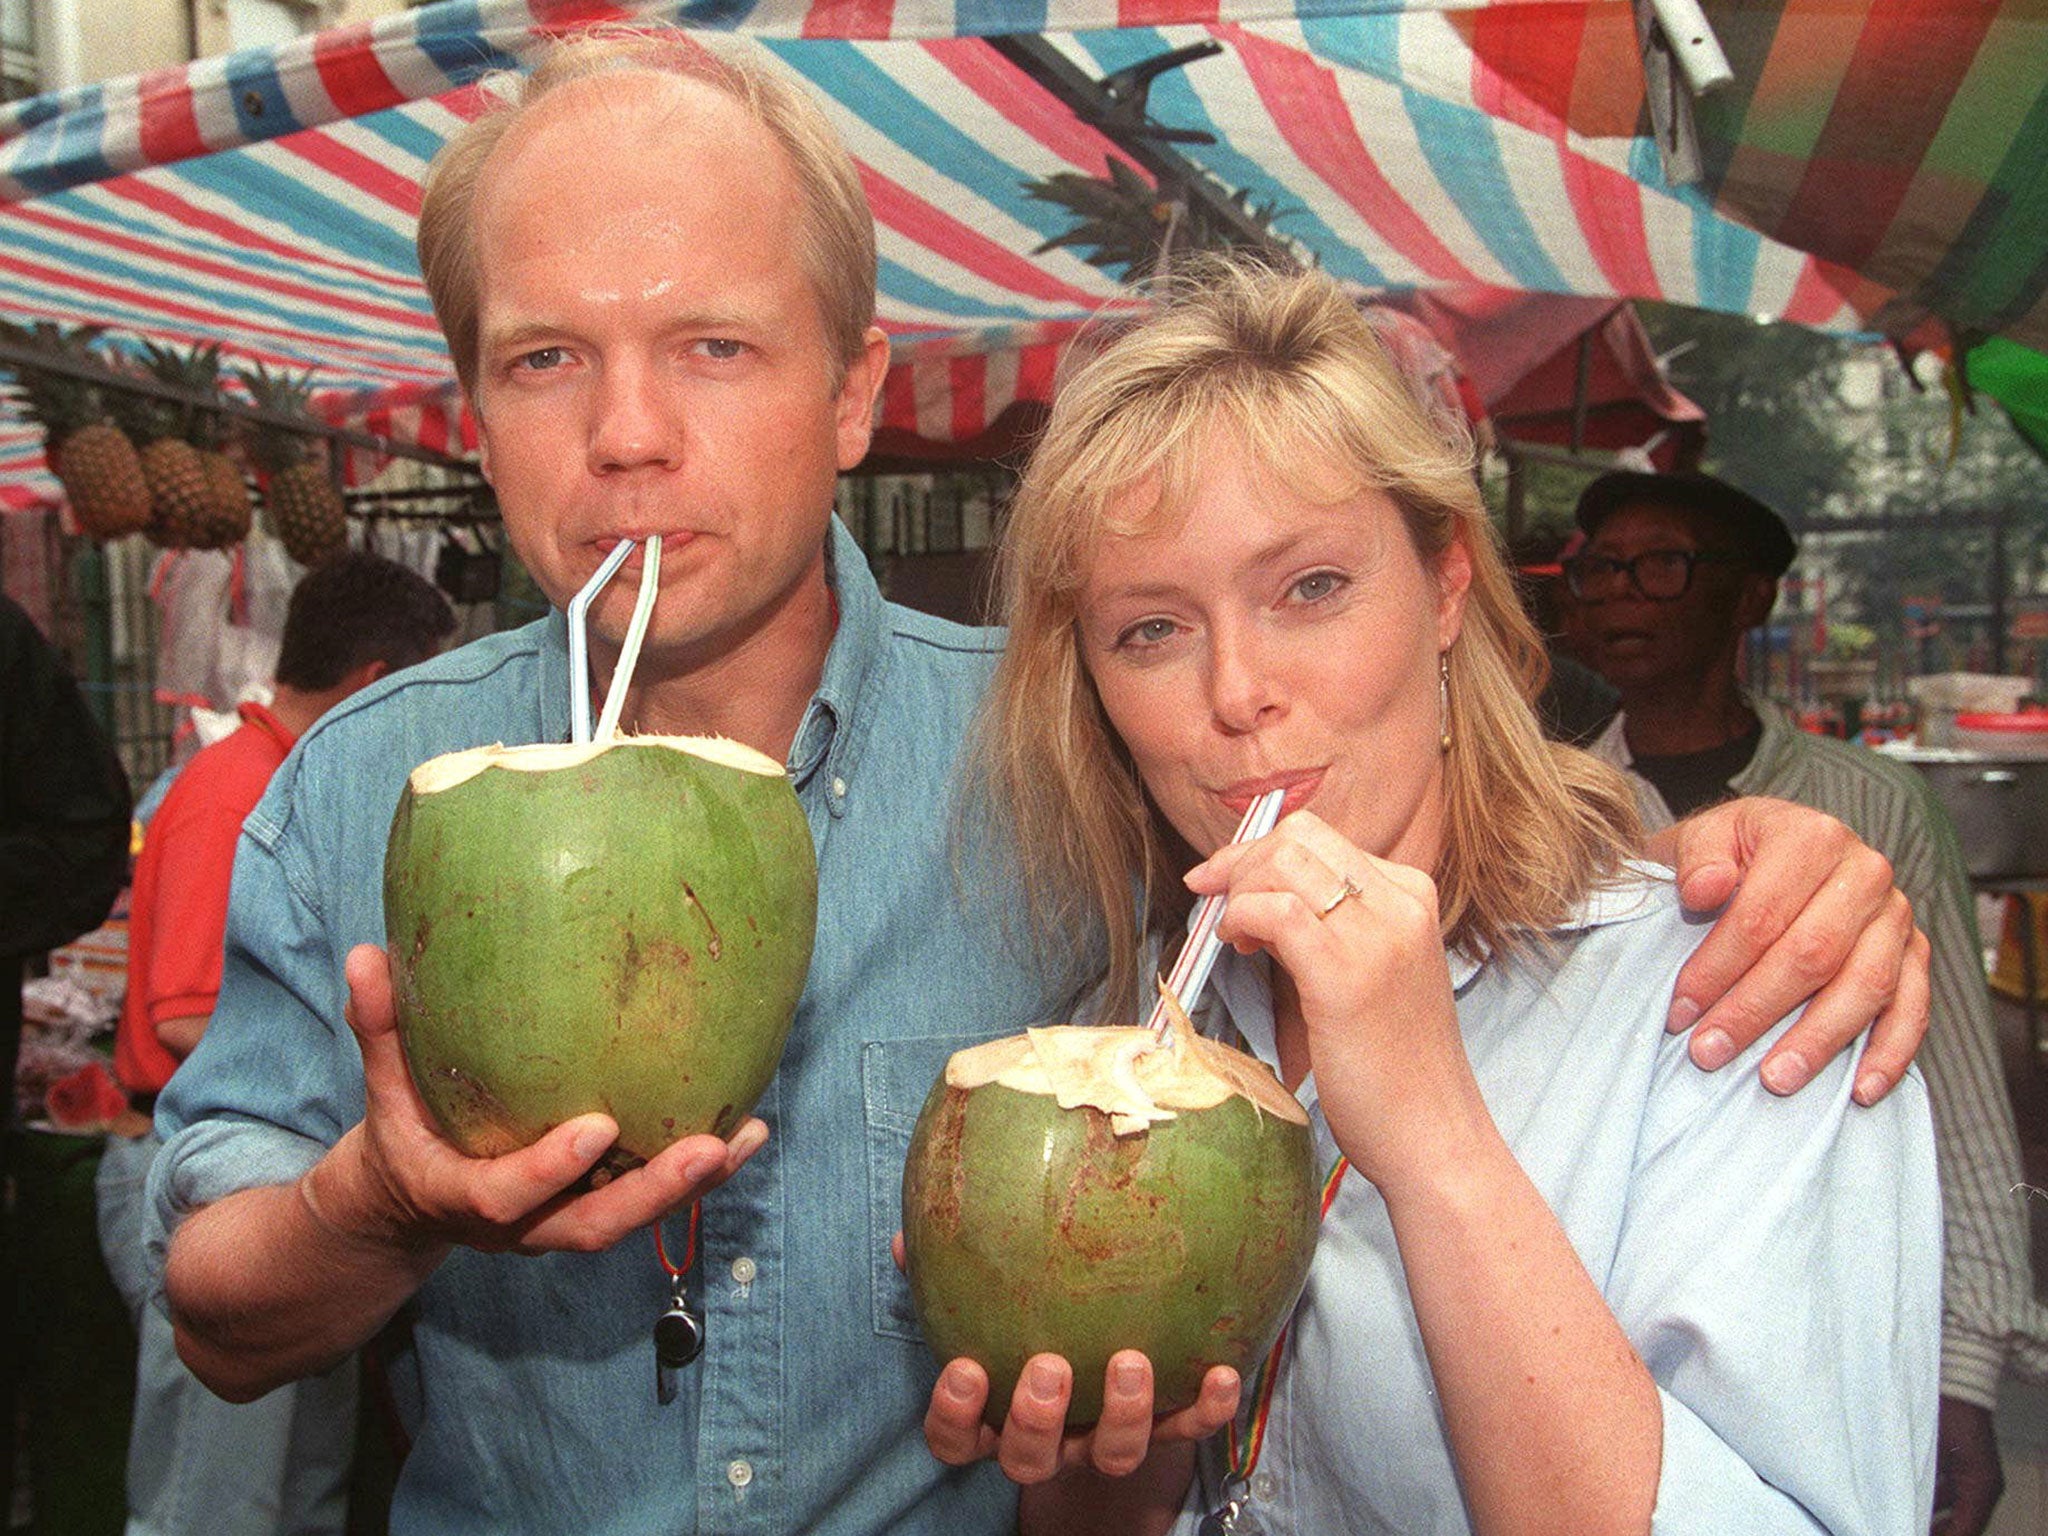 Fruitful: William Hague and Ffion Jenkins enjoy a coconut water